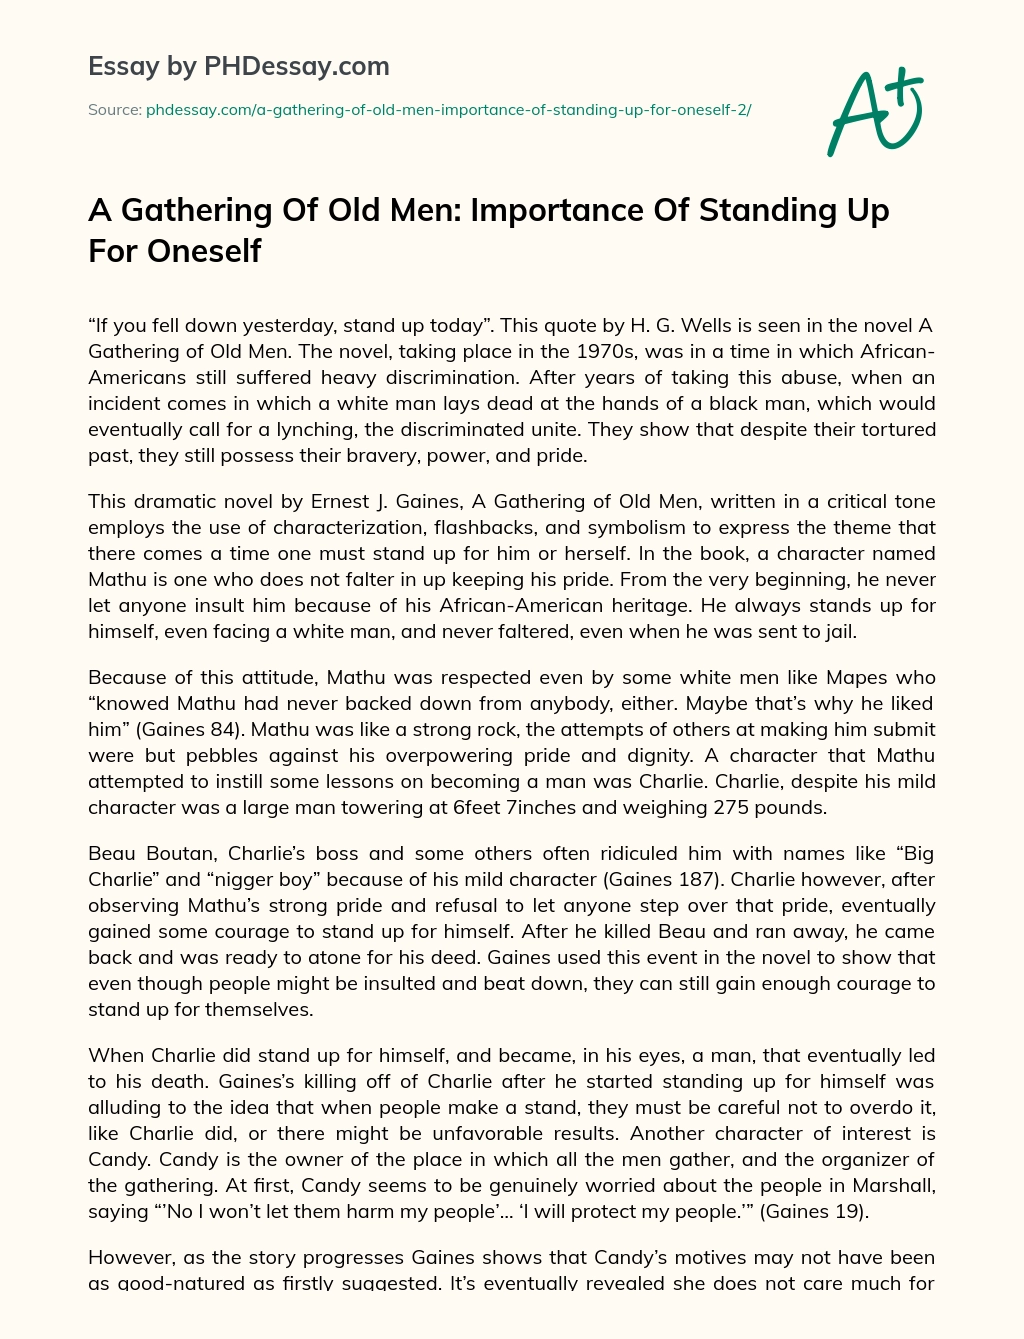 A Gathering Of Old Men: Importance Of Standing Up For Oneself essay